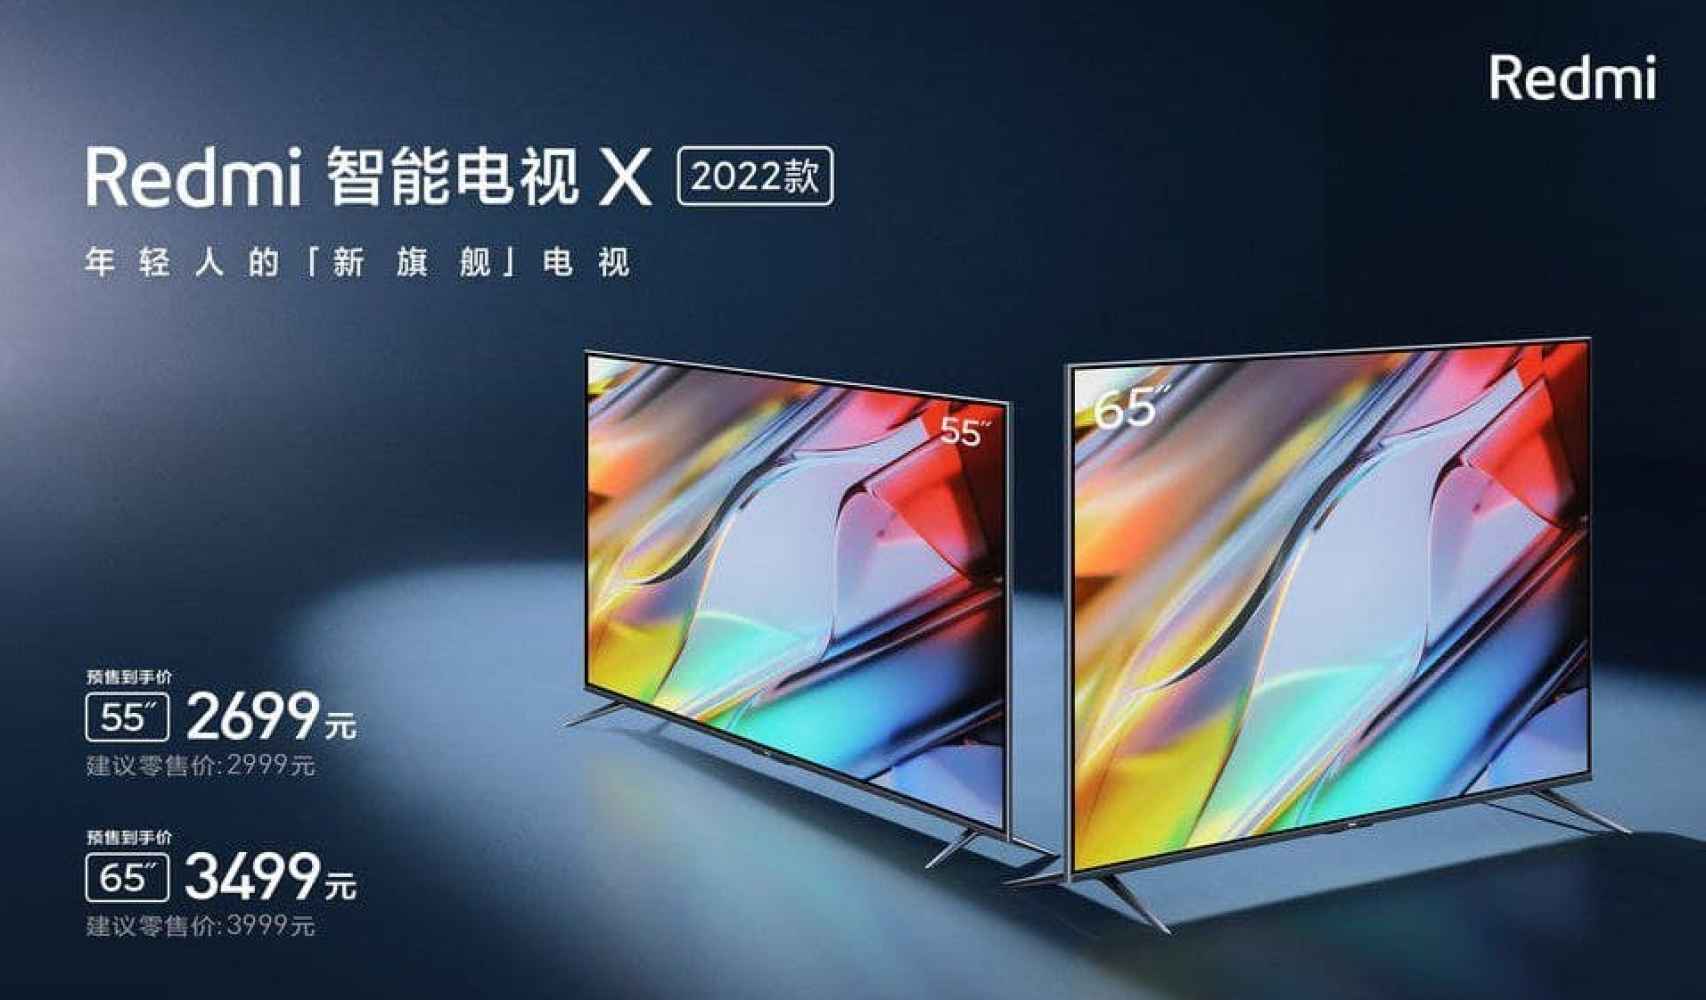 Specifications of the Redmi TV X 2022